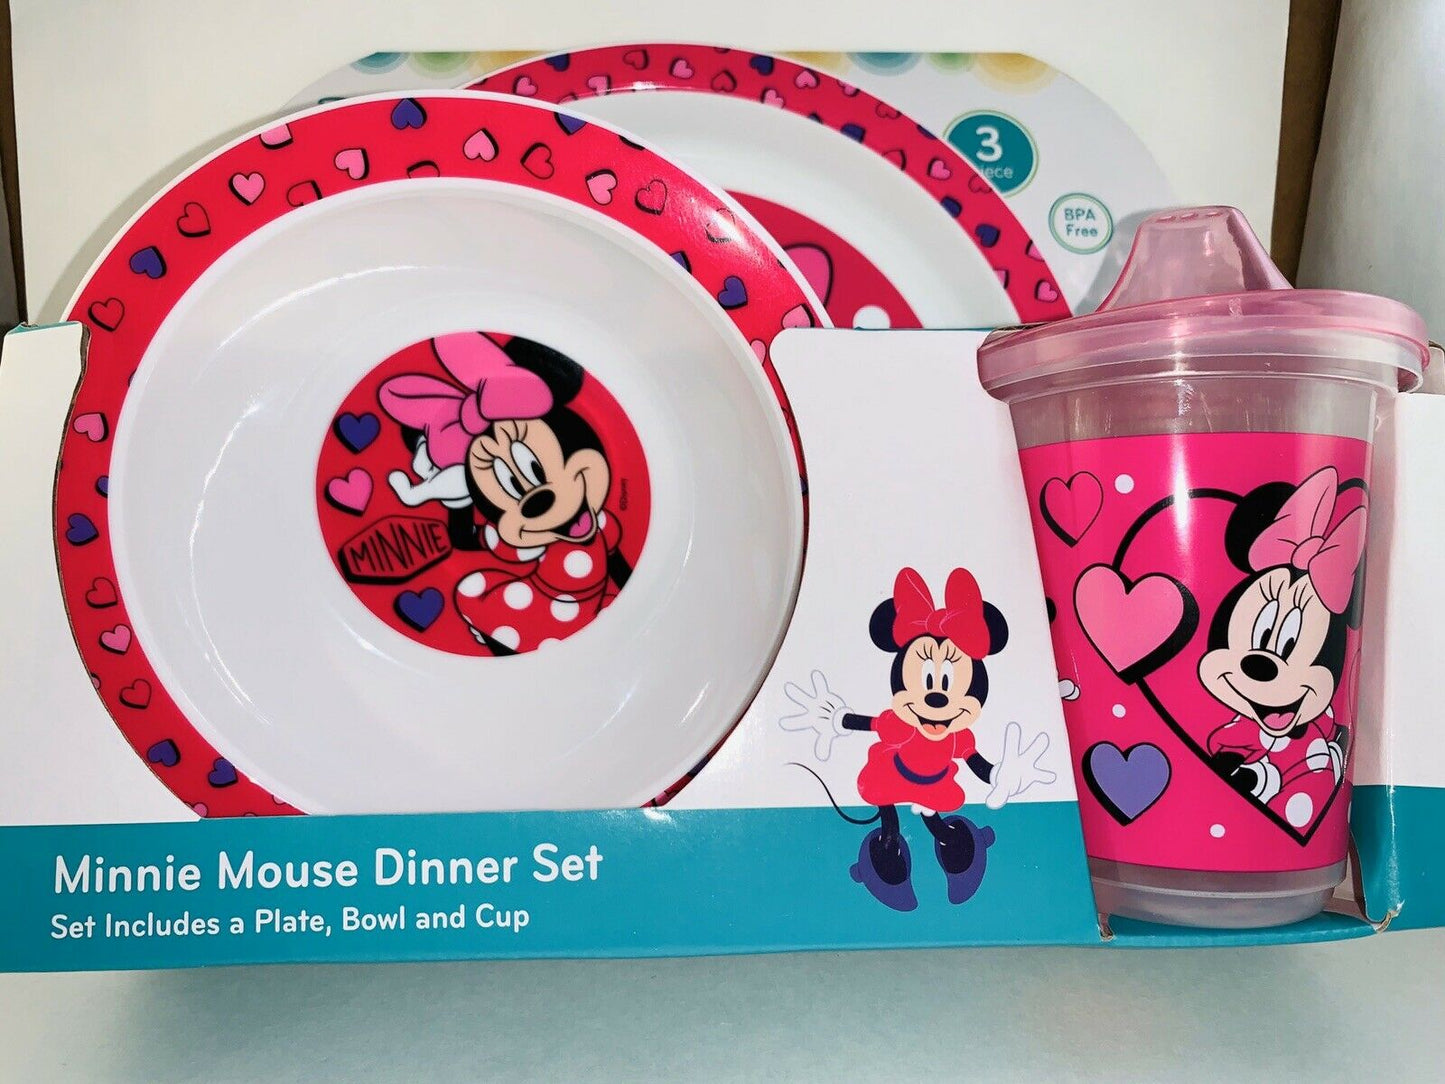 Minnie Mouse 3pc Dinner Set in Open Box (Plate, Bowl and Cup)